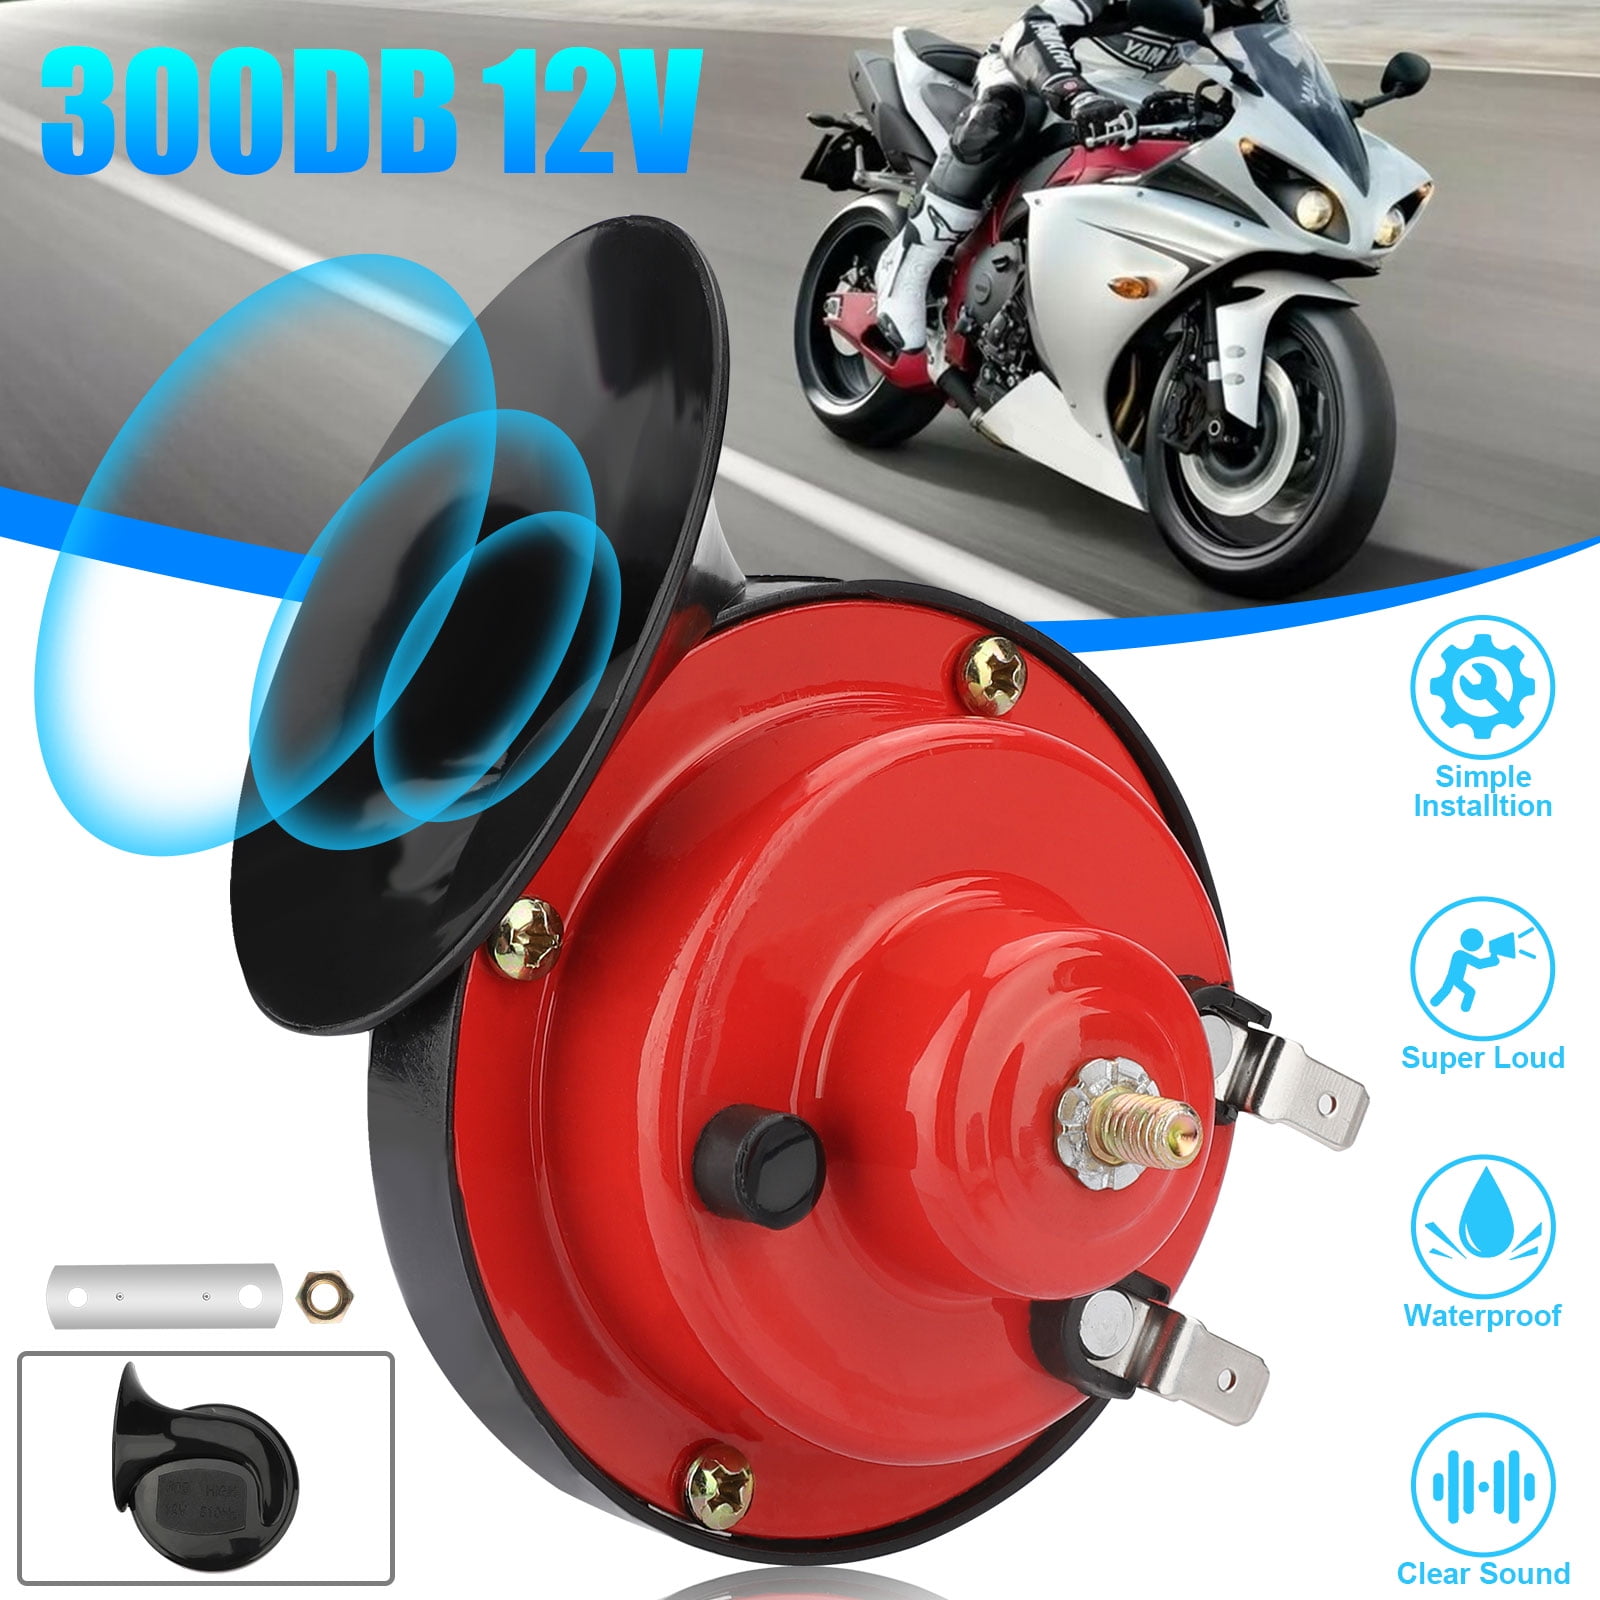 2PCS 12V Super Loud Train Electric Horn For Car Truck Bus Boat Motorcycle